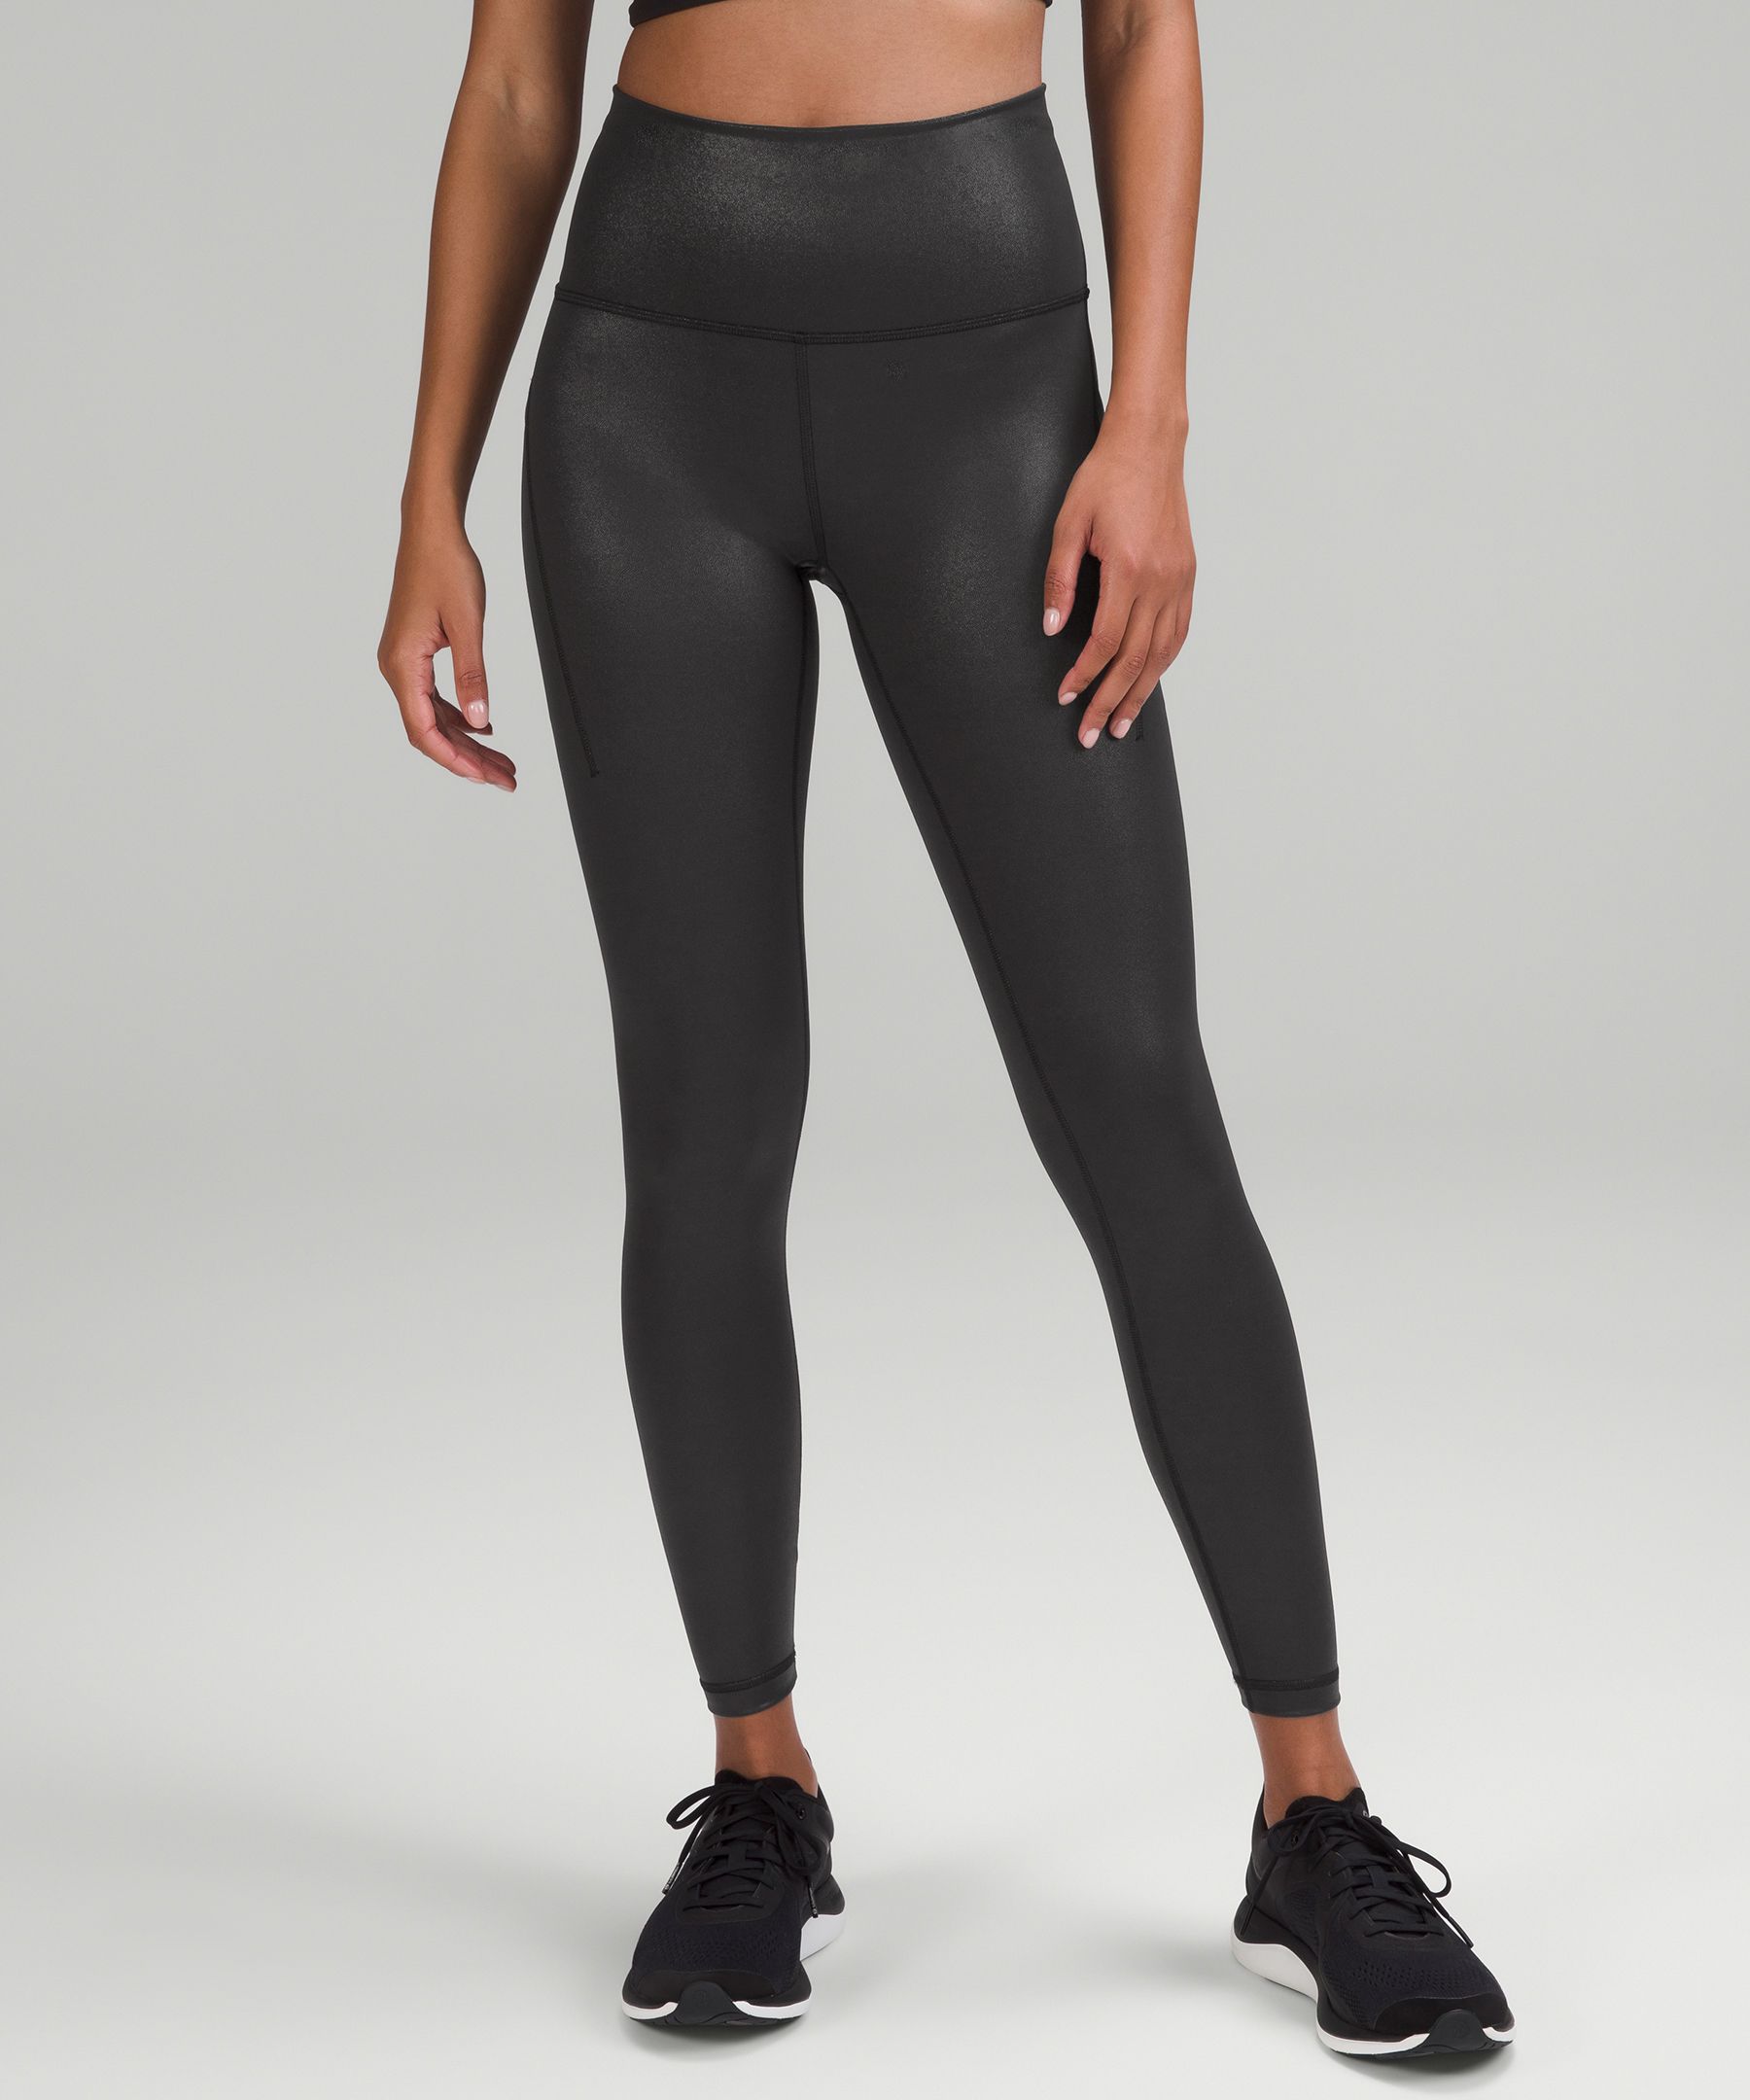 lululemon Wunder Train: Our review of the new collection